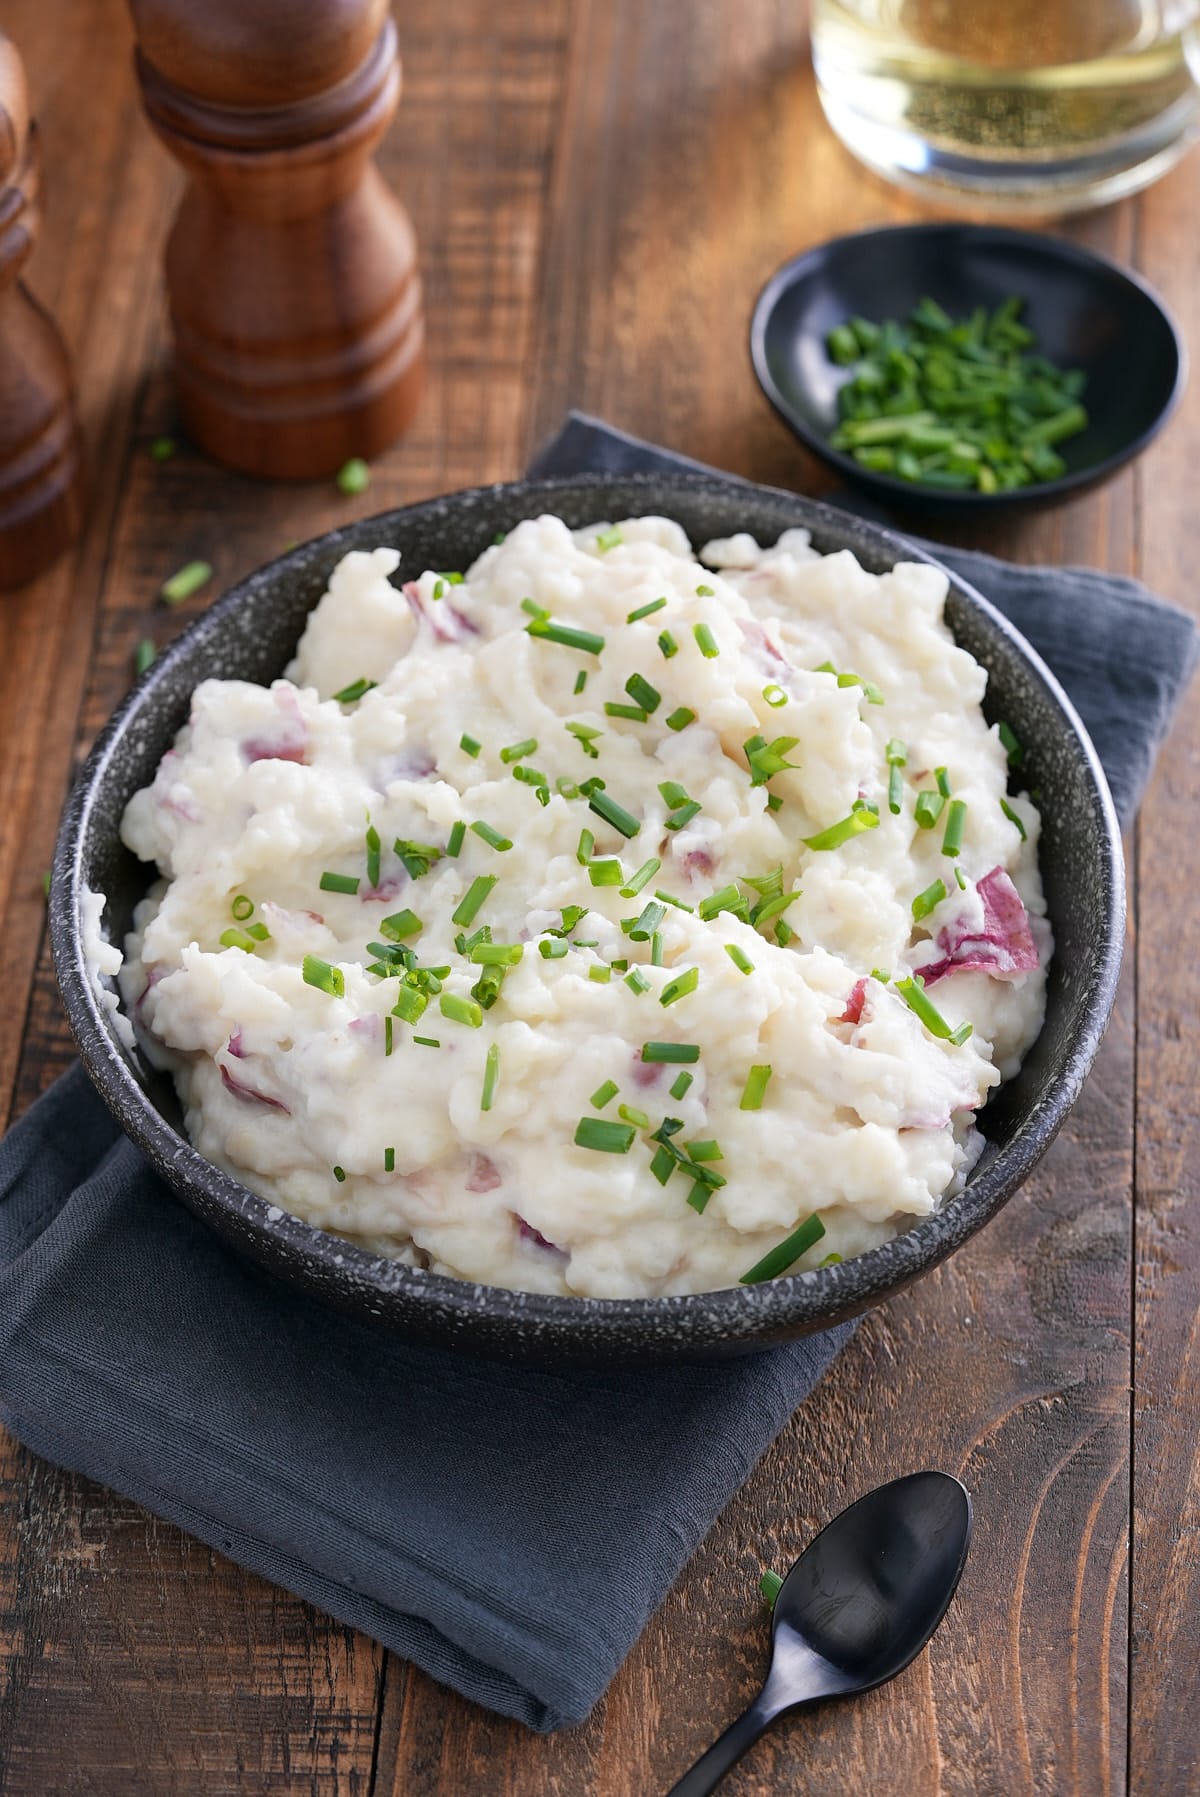 A bowl of mashed red skinned potatoes garnished with finely chopped chives.